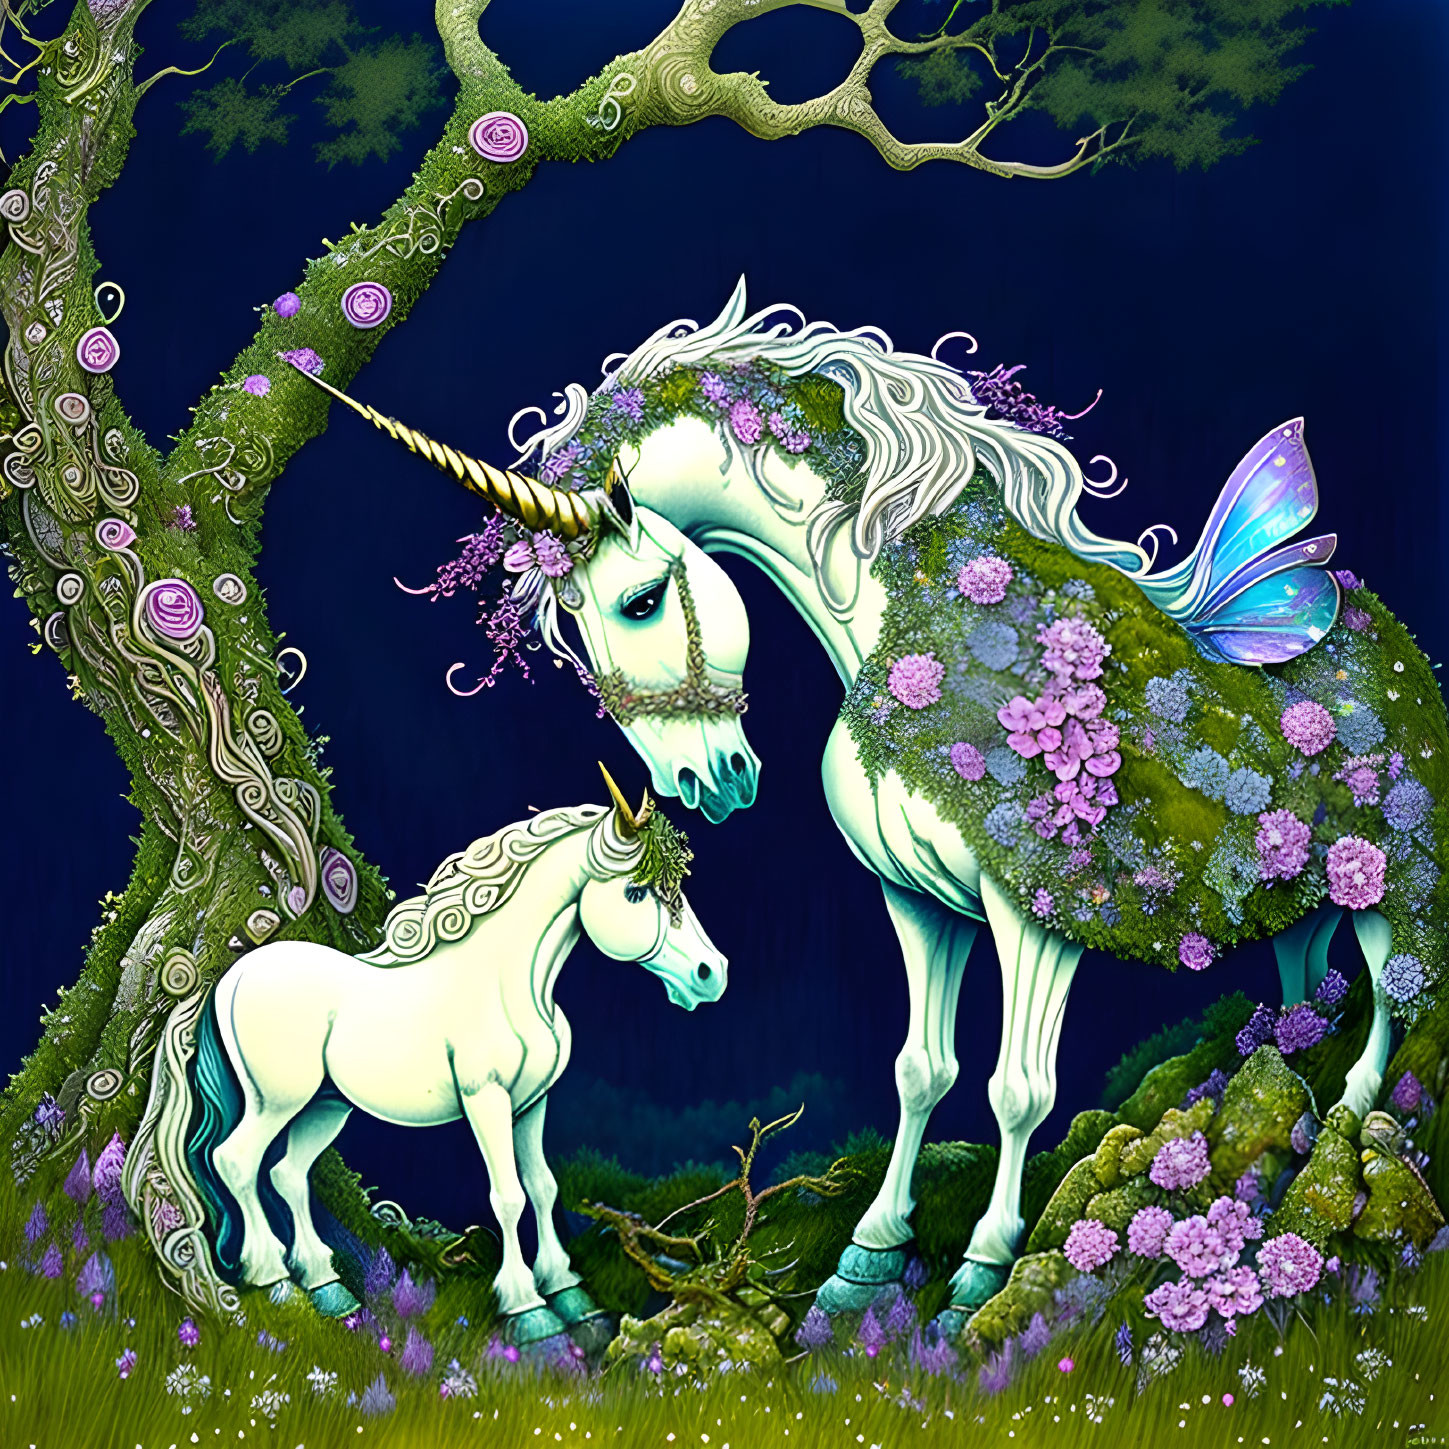 White unicorn and foal in floral forest with butterfly